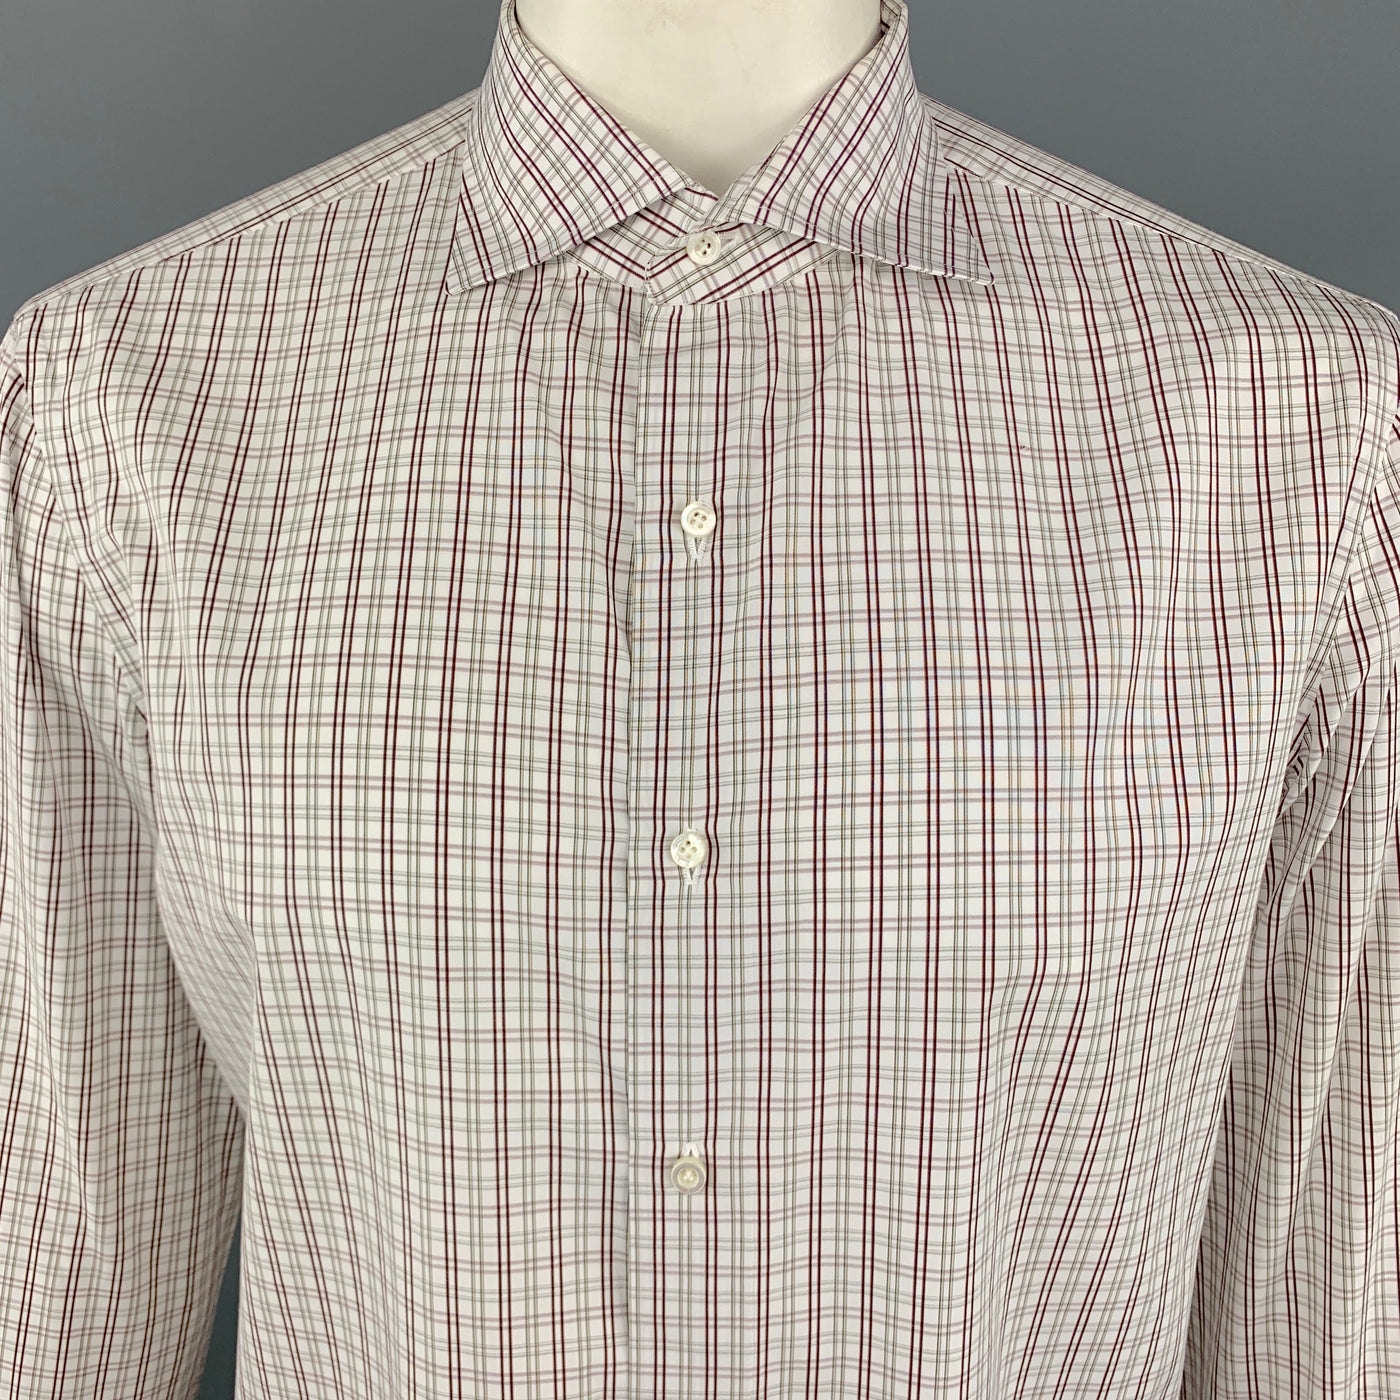 ISAIA Size XL Plaid White & Brown Cotton Button Up Long Sleeve Shirt